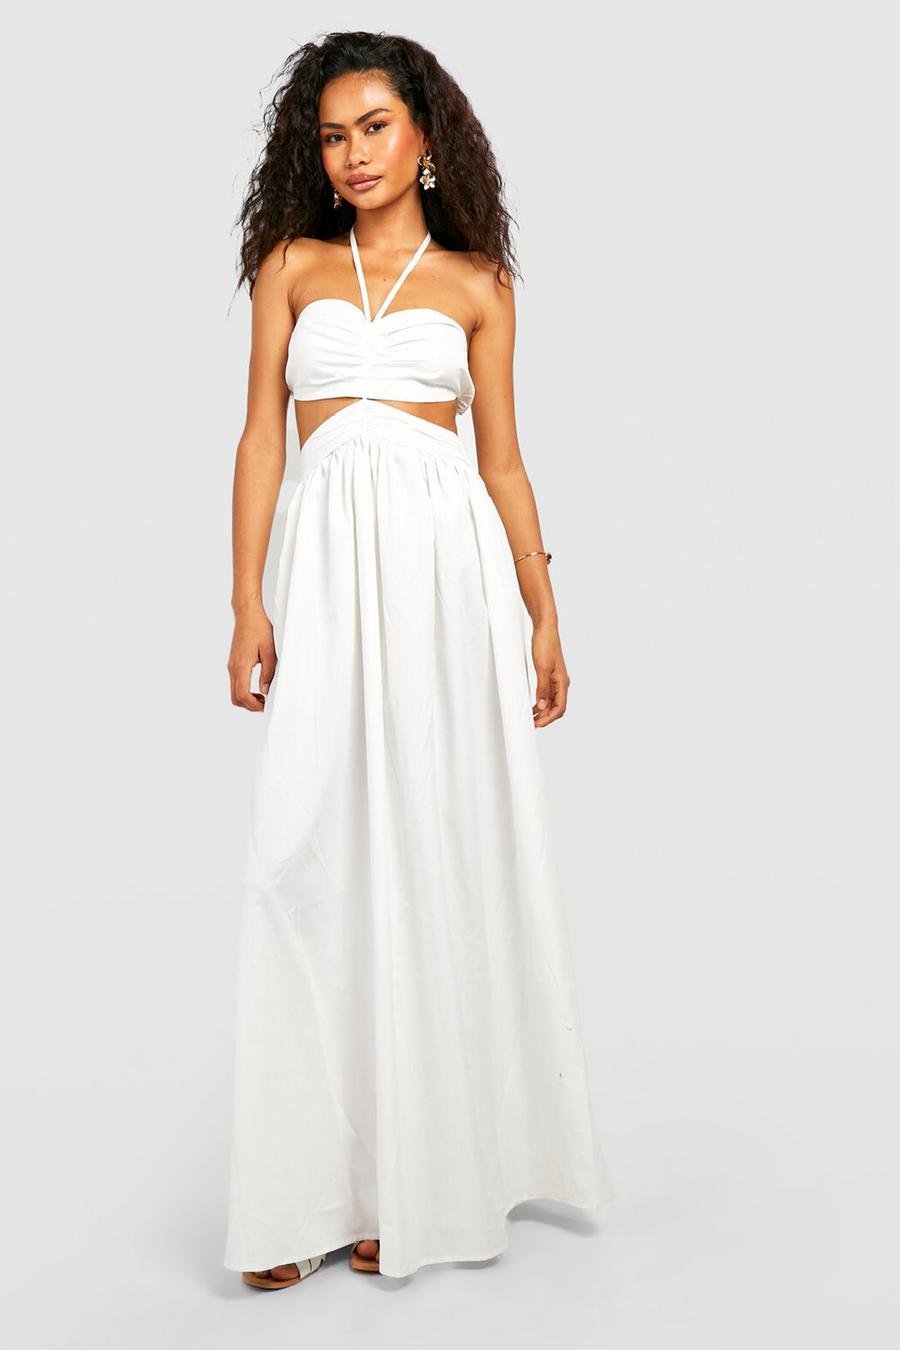 White Strappy Halter Cut Out Maxi Dress